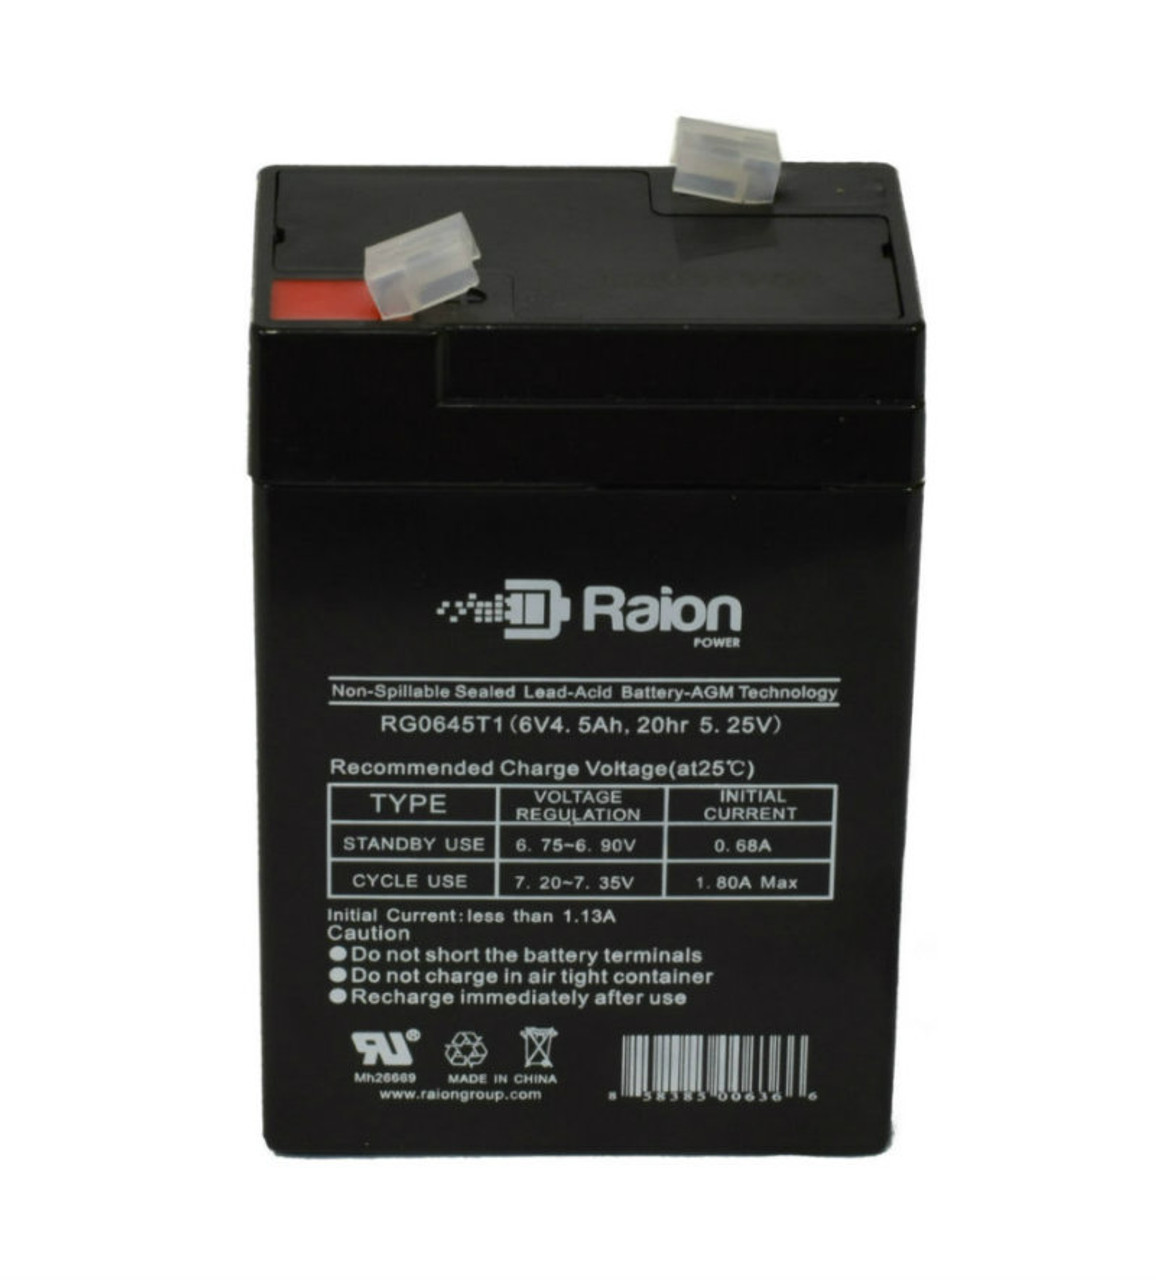 Raion Power RG0645T1 Replacement Battery Cartridge for SBB 3FM5